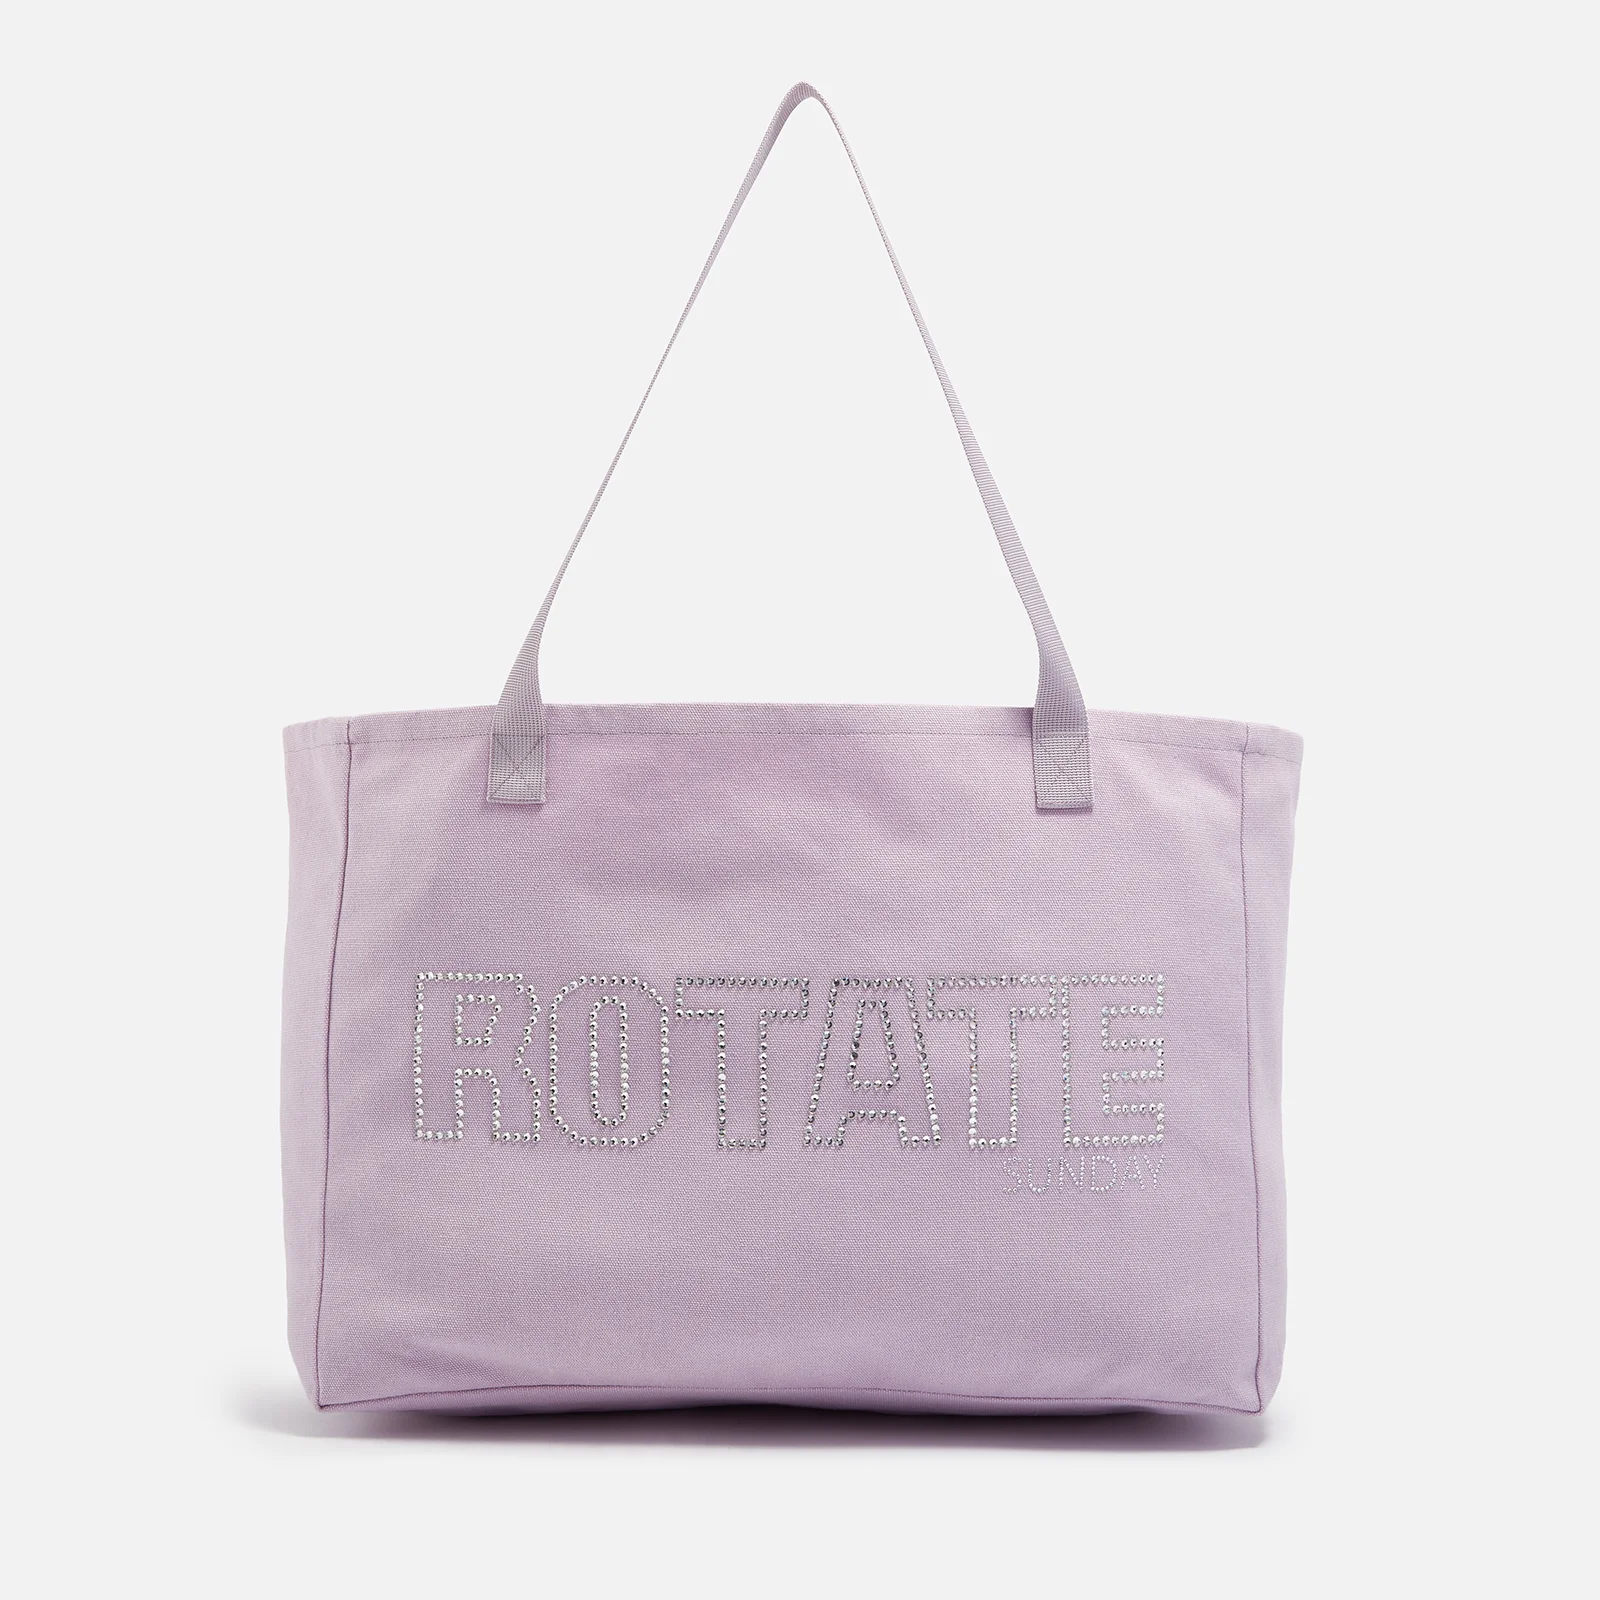 ROTATE Logo-Embossed Canvas Tote Bag Image 1